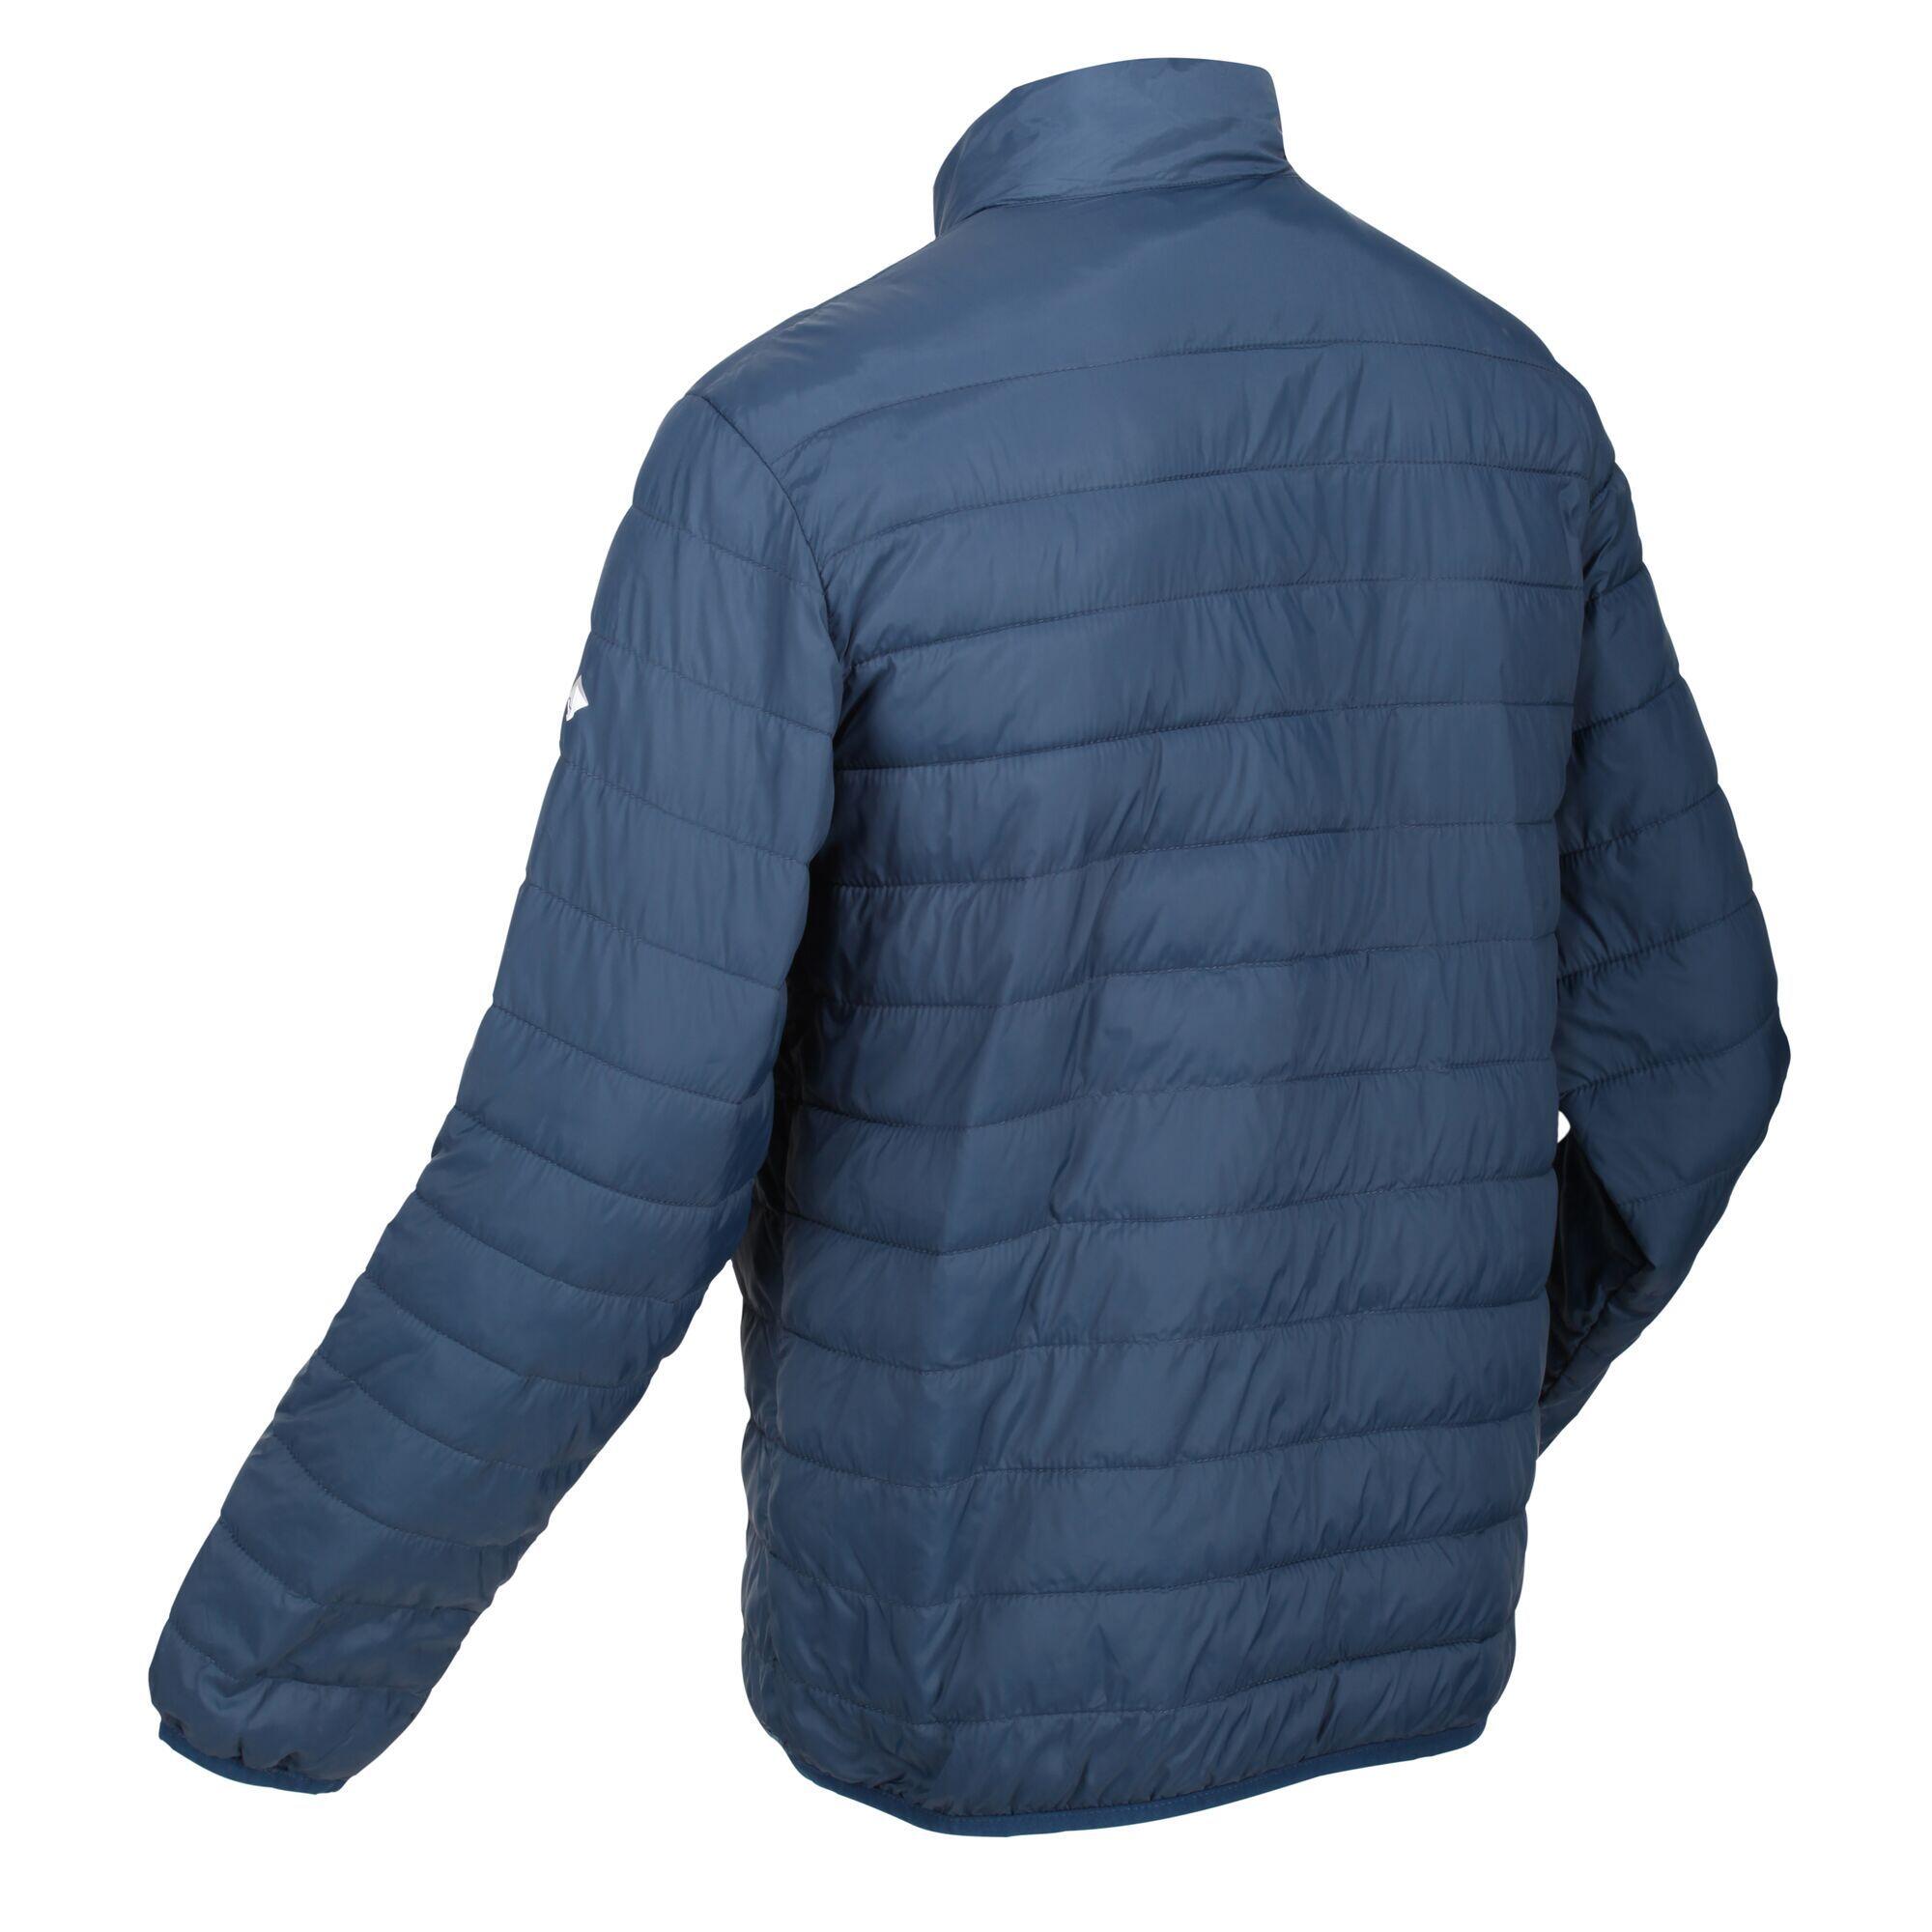 Mens Hillpack Quilted Insulated Jacket (Moonlight Denim) 3/4